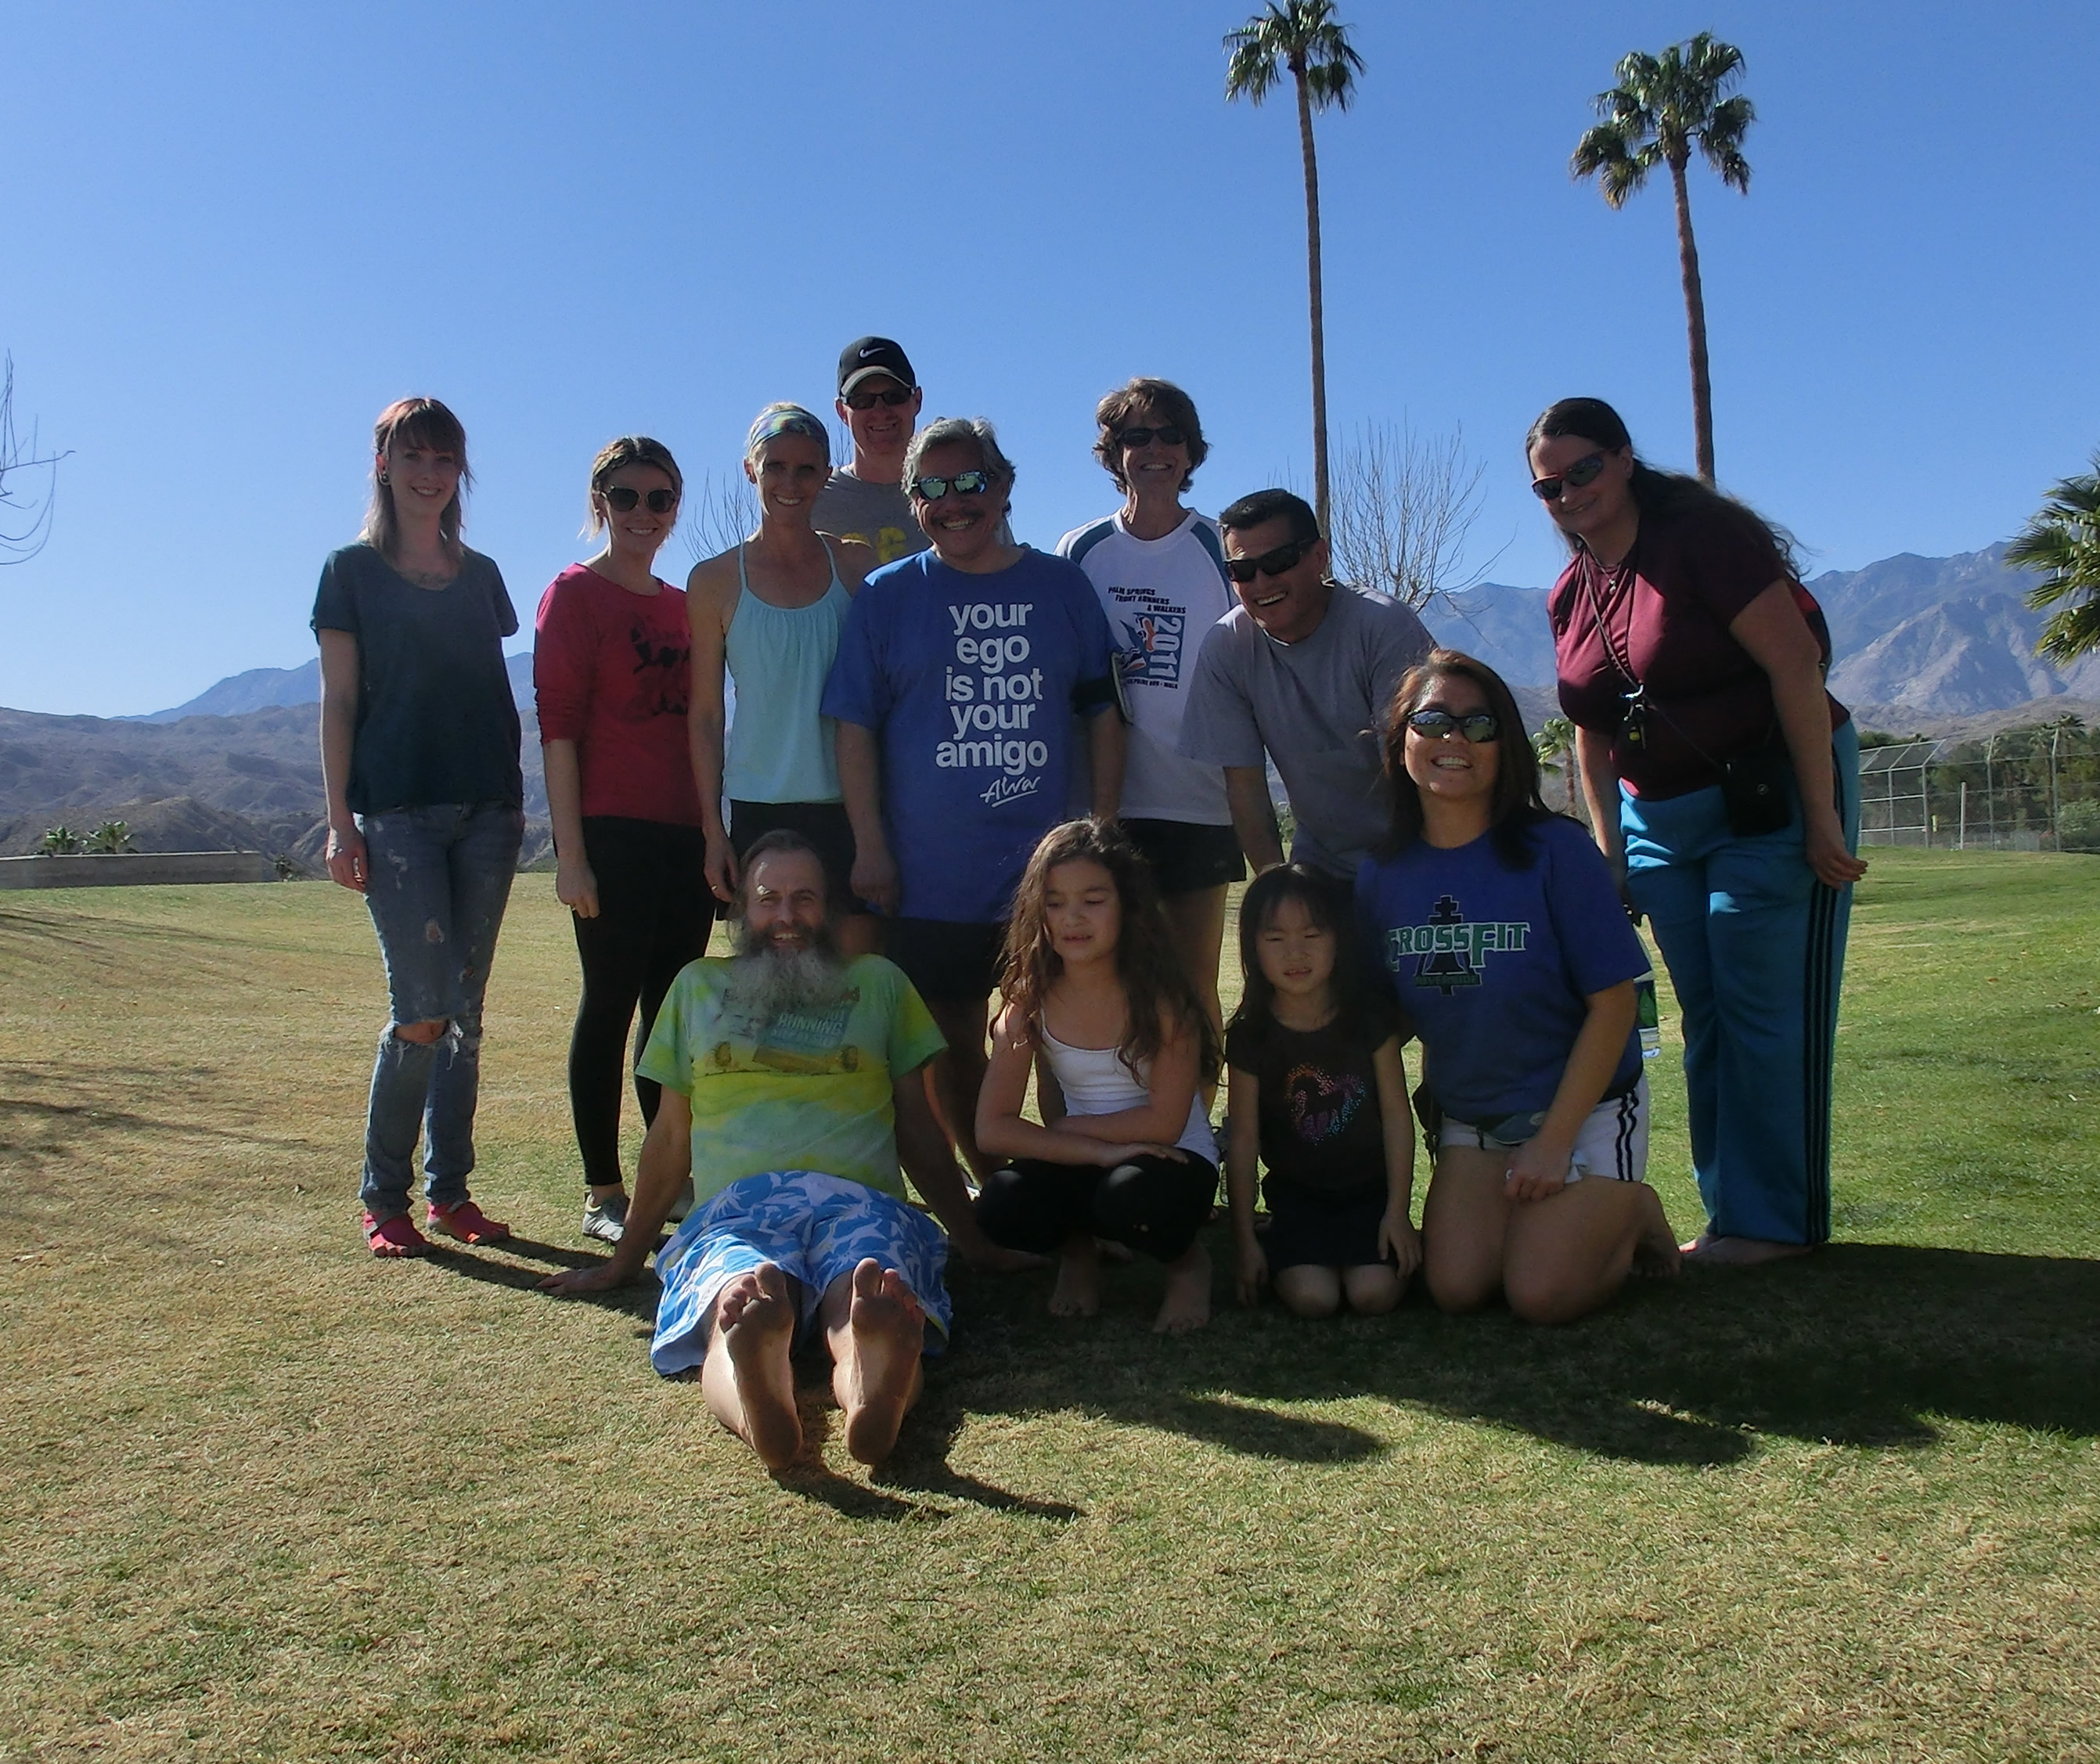 Marywood Palm Valley School Cross Country, Palm Springs CA